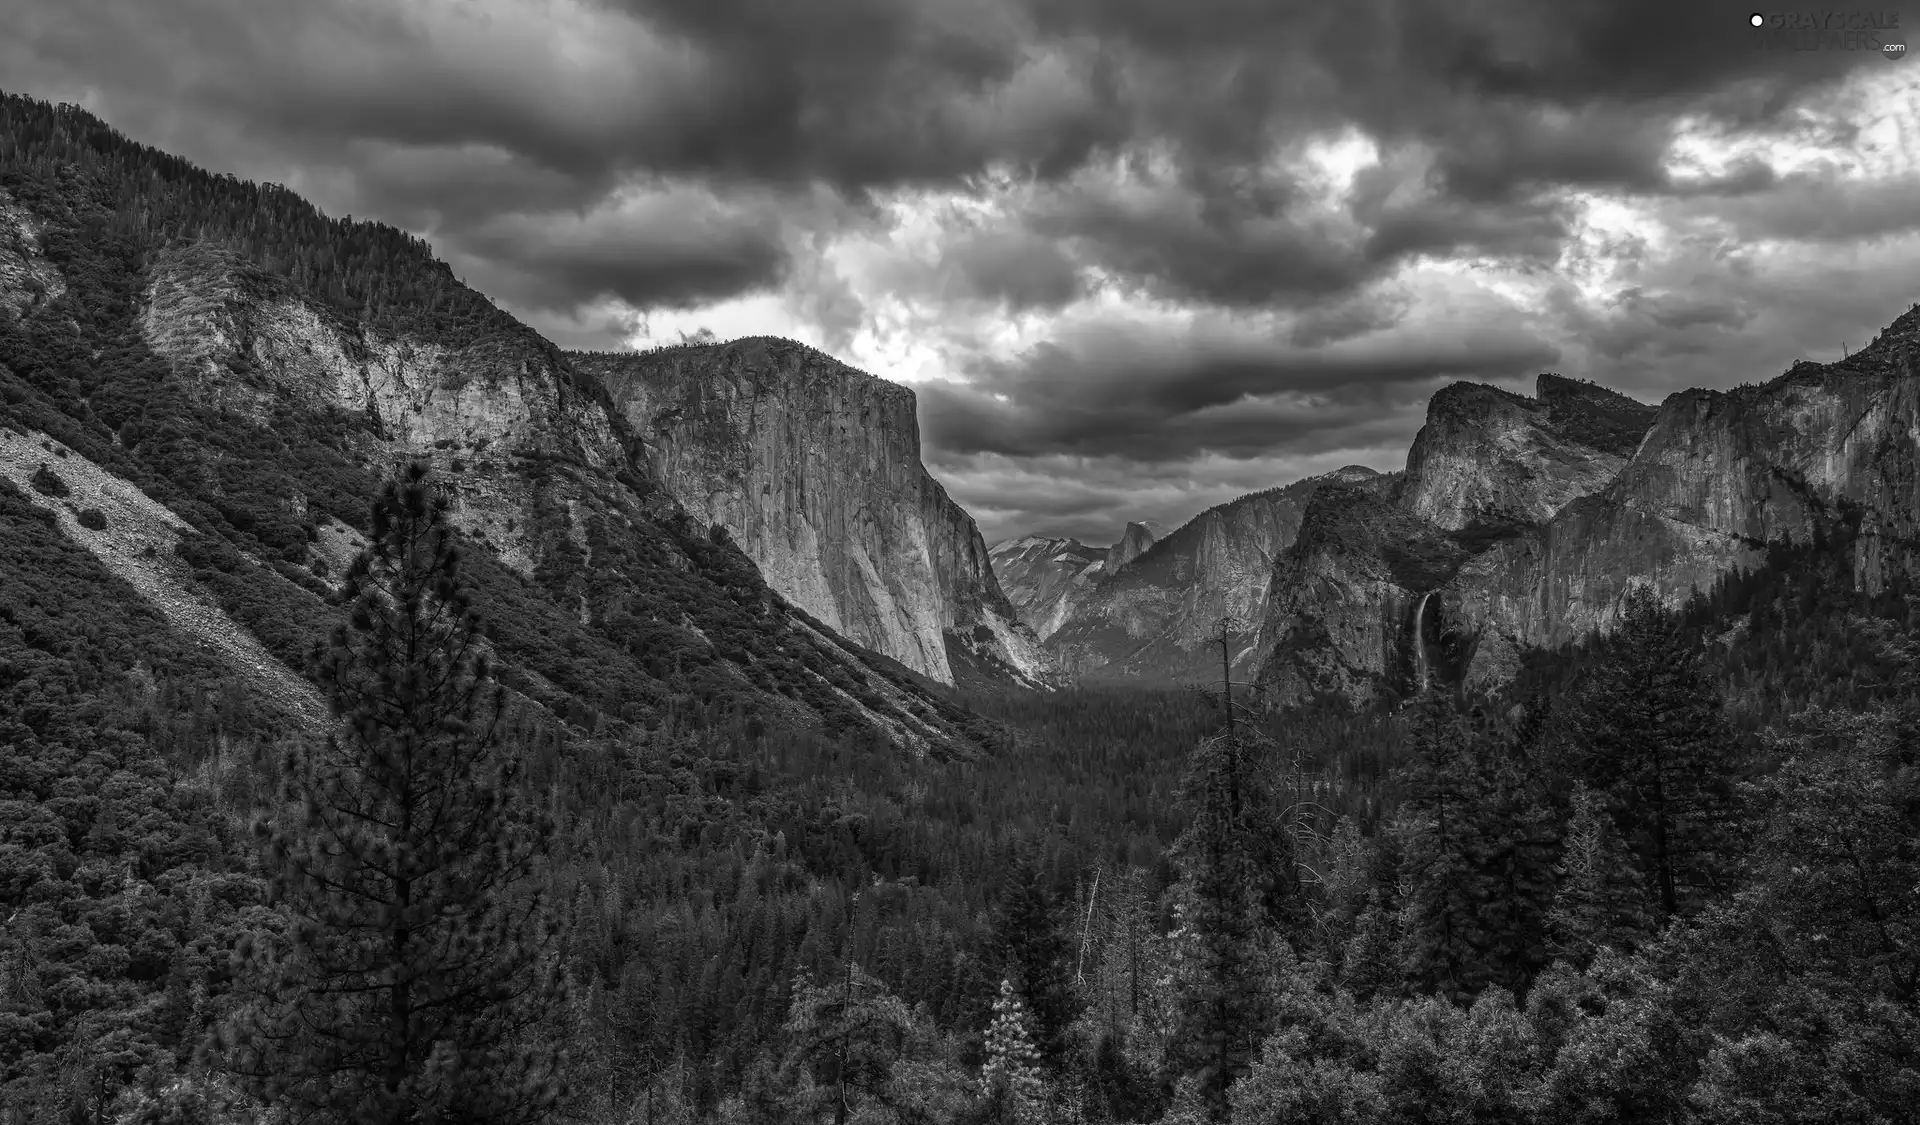 The United States, Yosemite Valley, clouds, State of California, Yosemite National Park, Mountains, Spruces